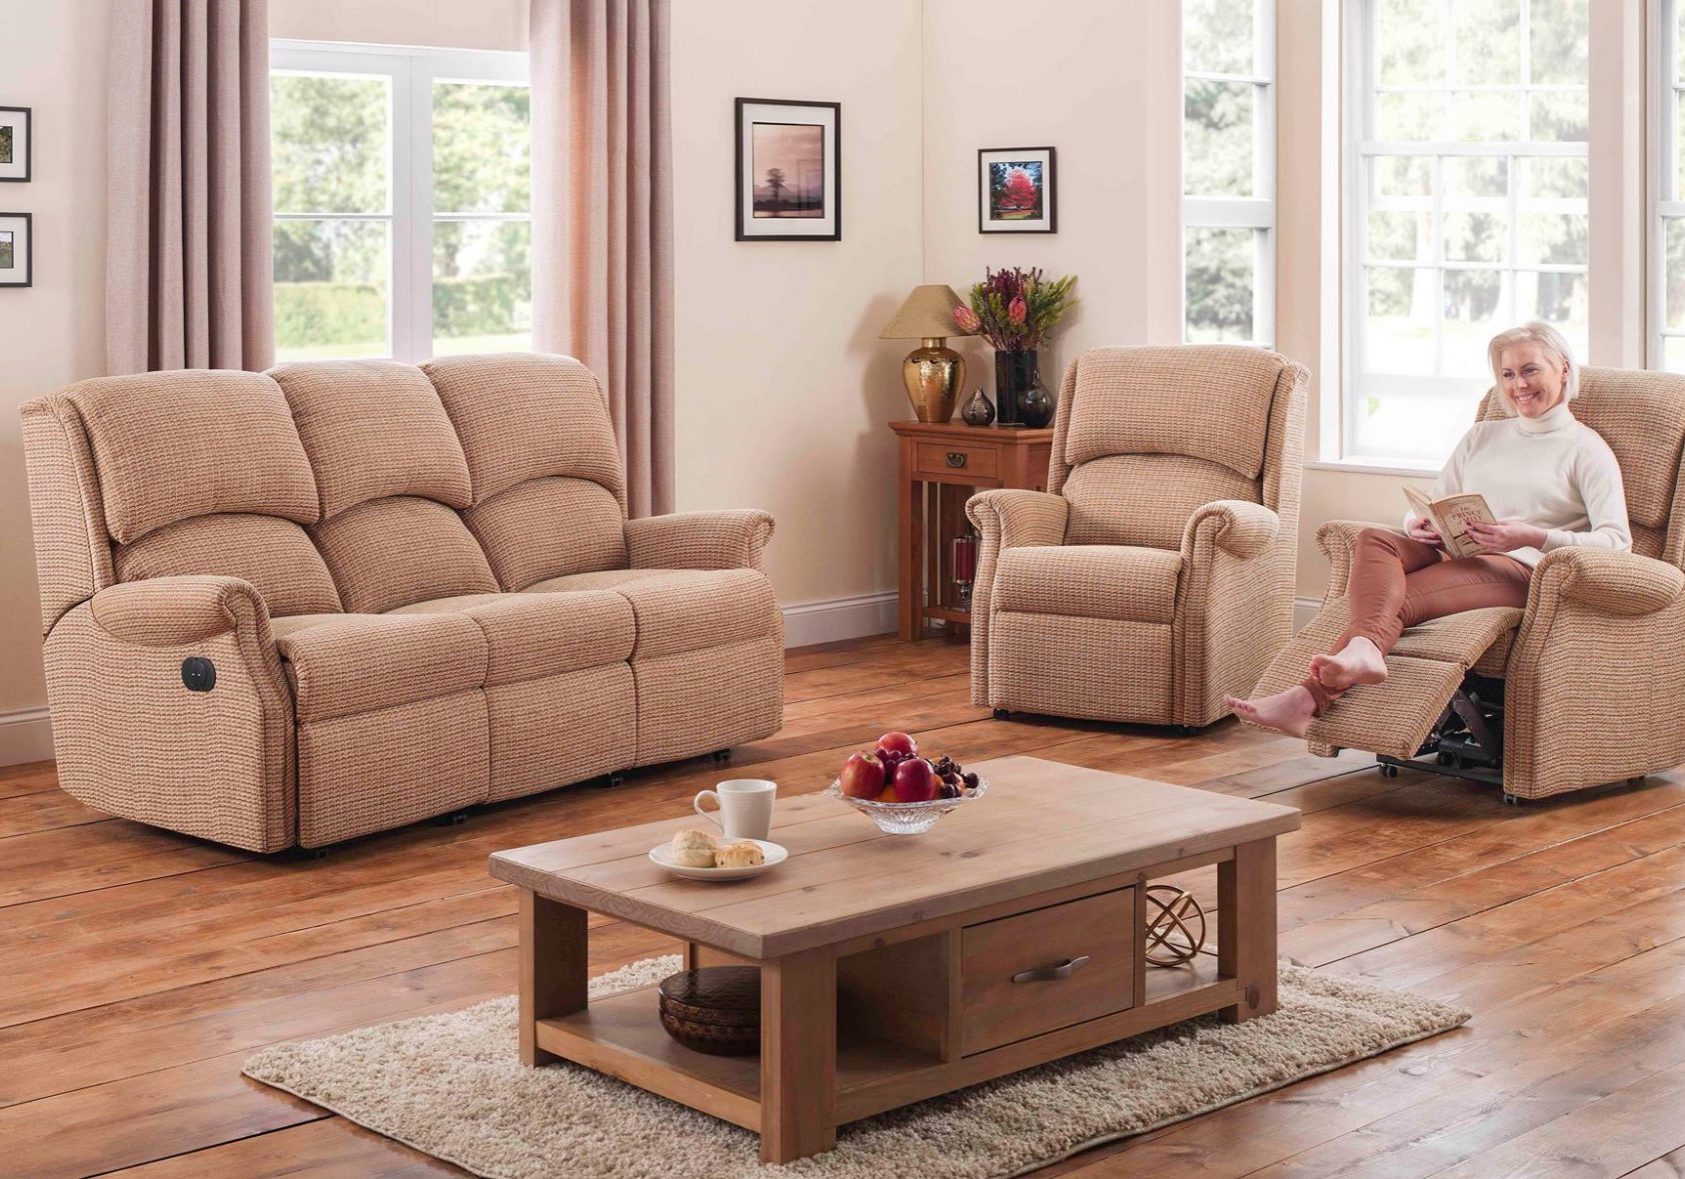 Mobility Recliner Furniture in Northumberland